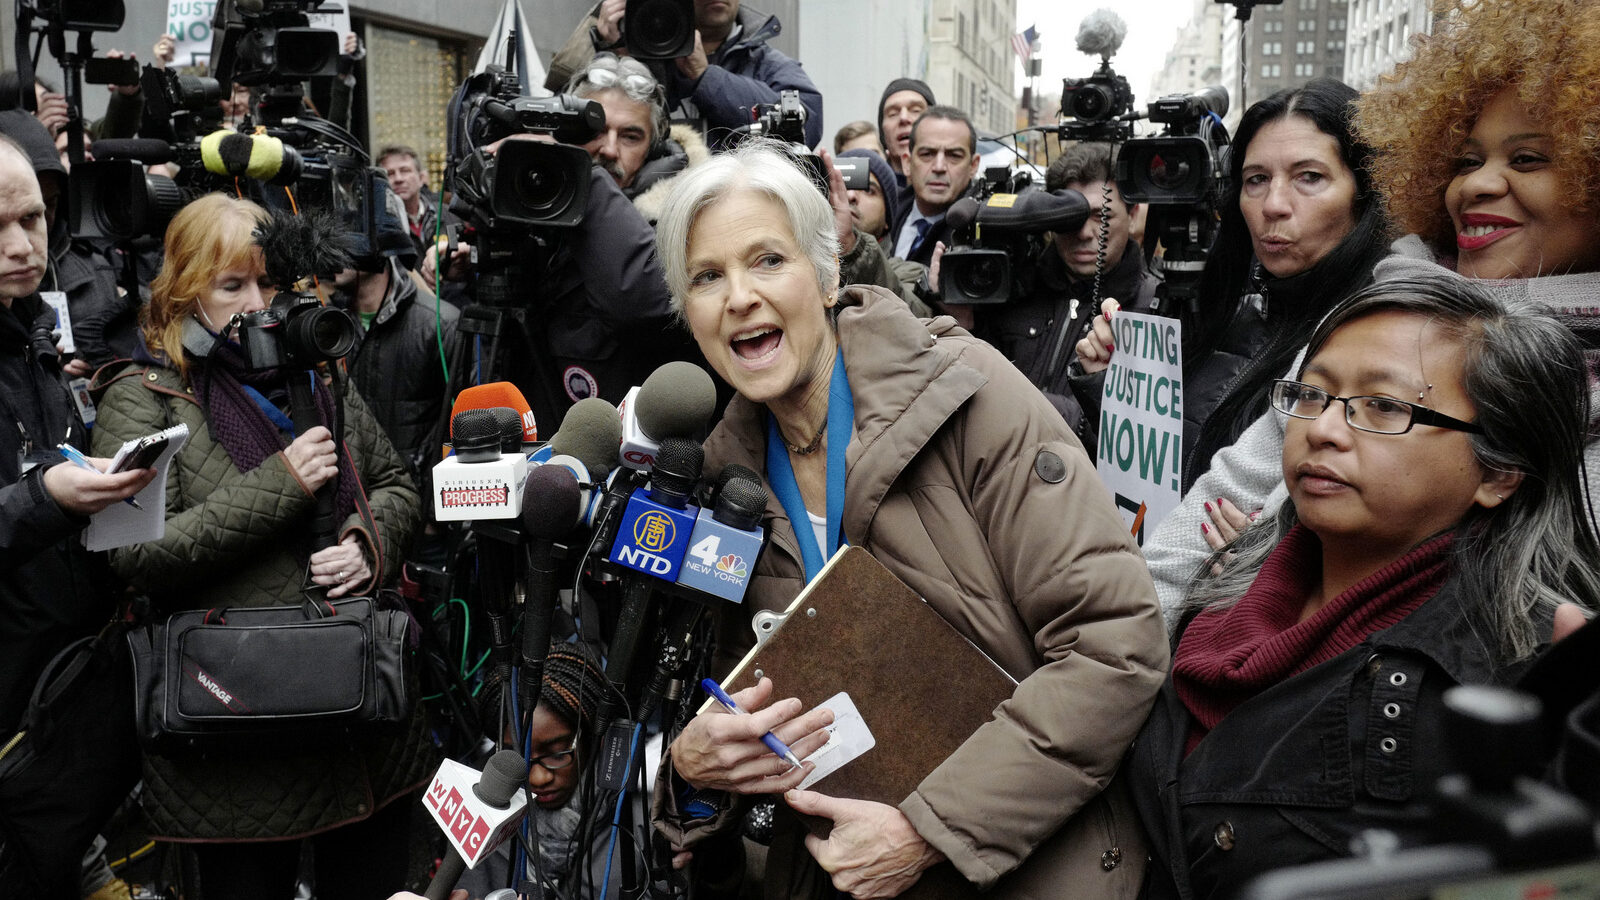 Jill Stein, the presidential Green Party candidate, speaks at a news conference in front of Trump Tower, Monday, Dec. 5, 2016, in New York. Stein is spearheading recount efforts in Pennsylvania, Michigan and Wisconsin. (AP Photo/Mark Lennihan)